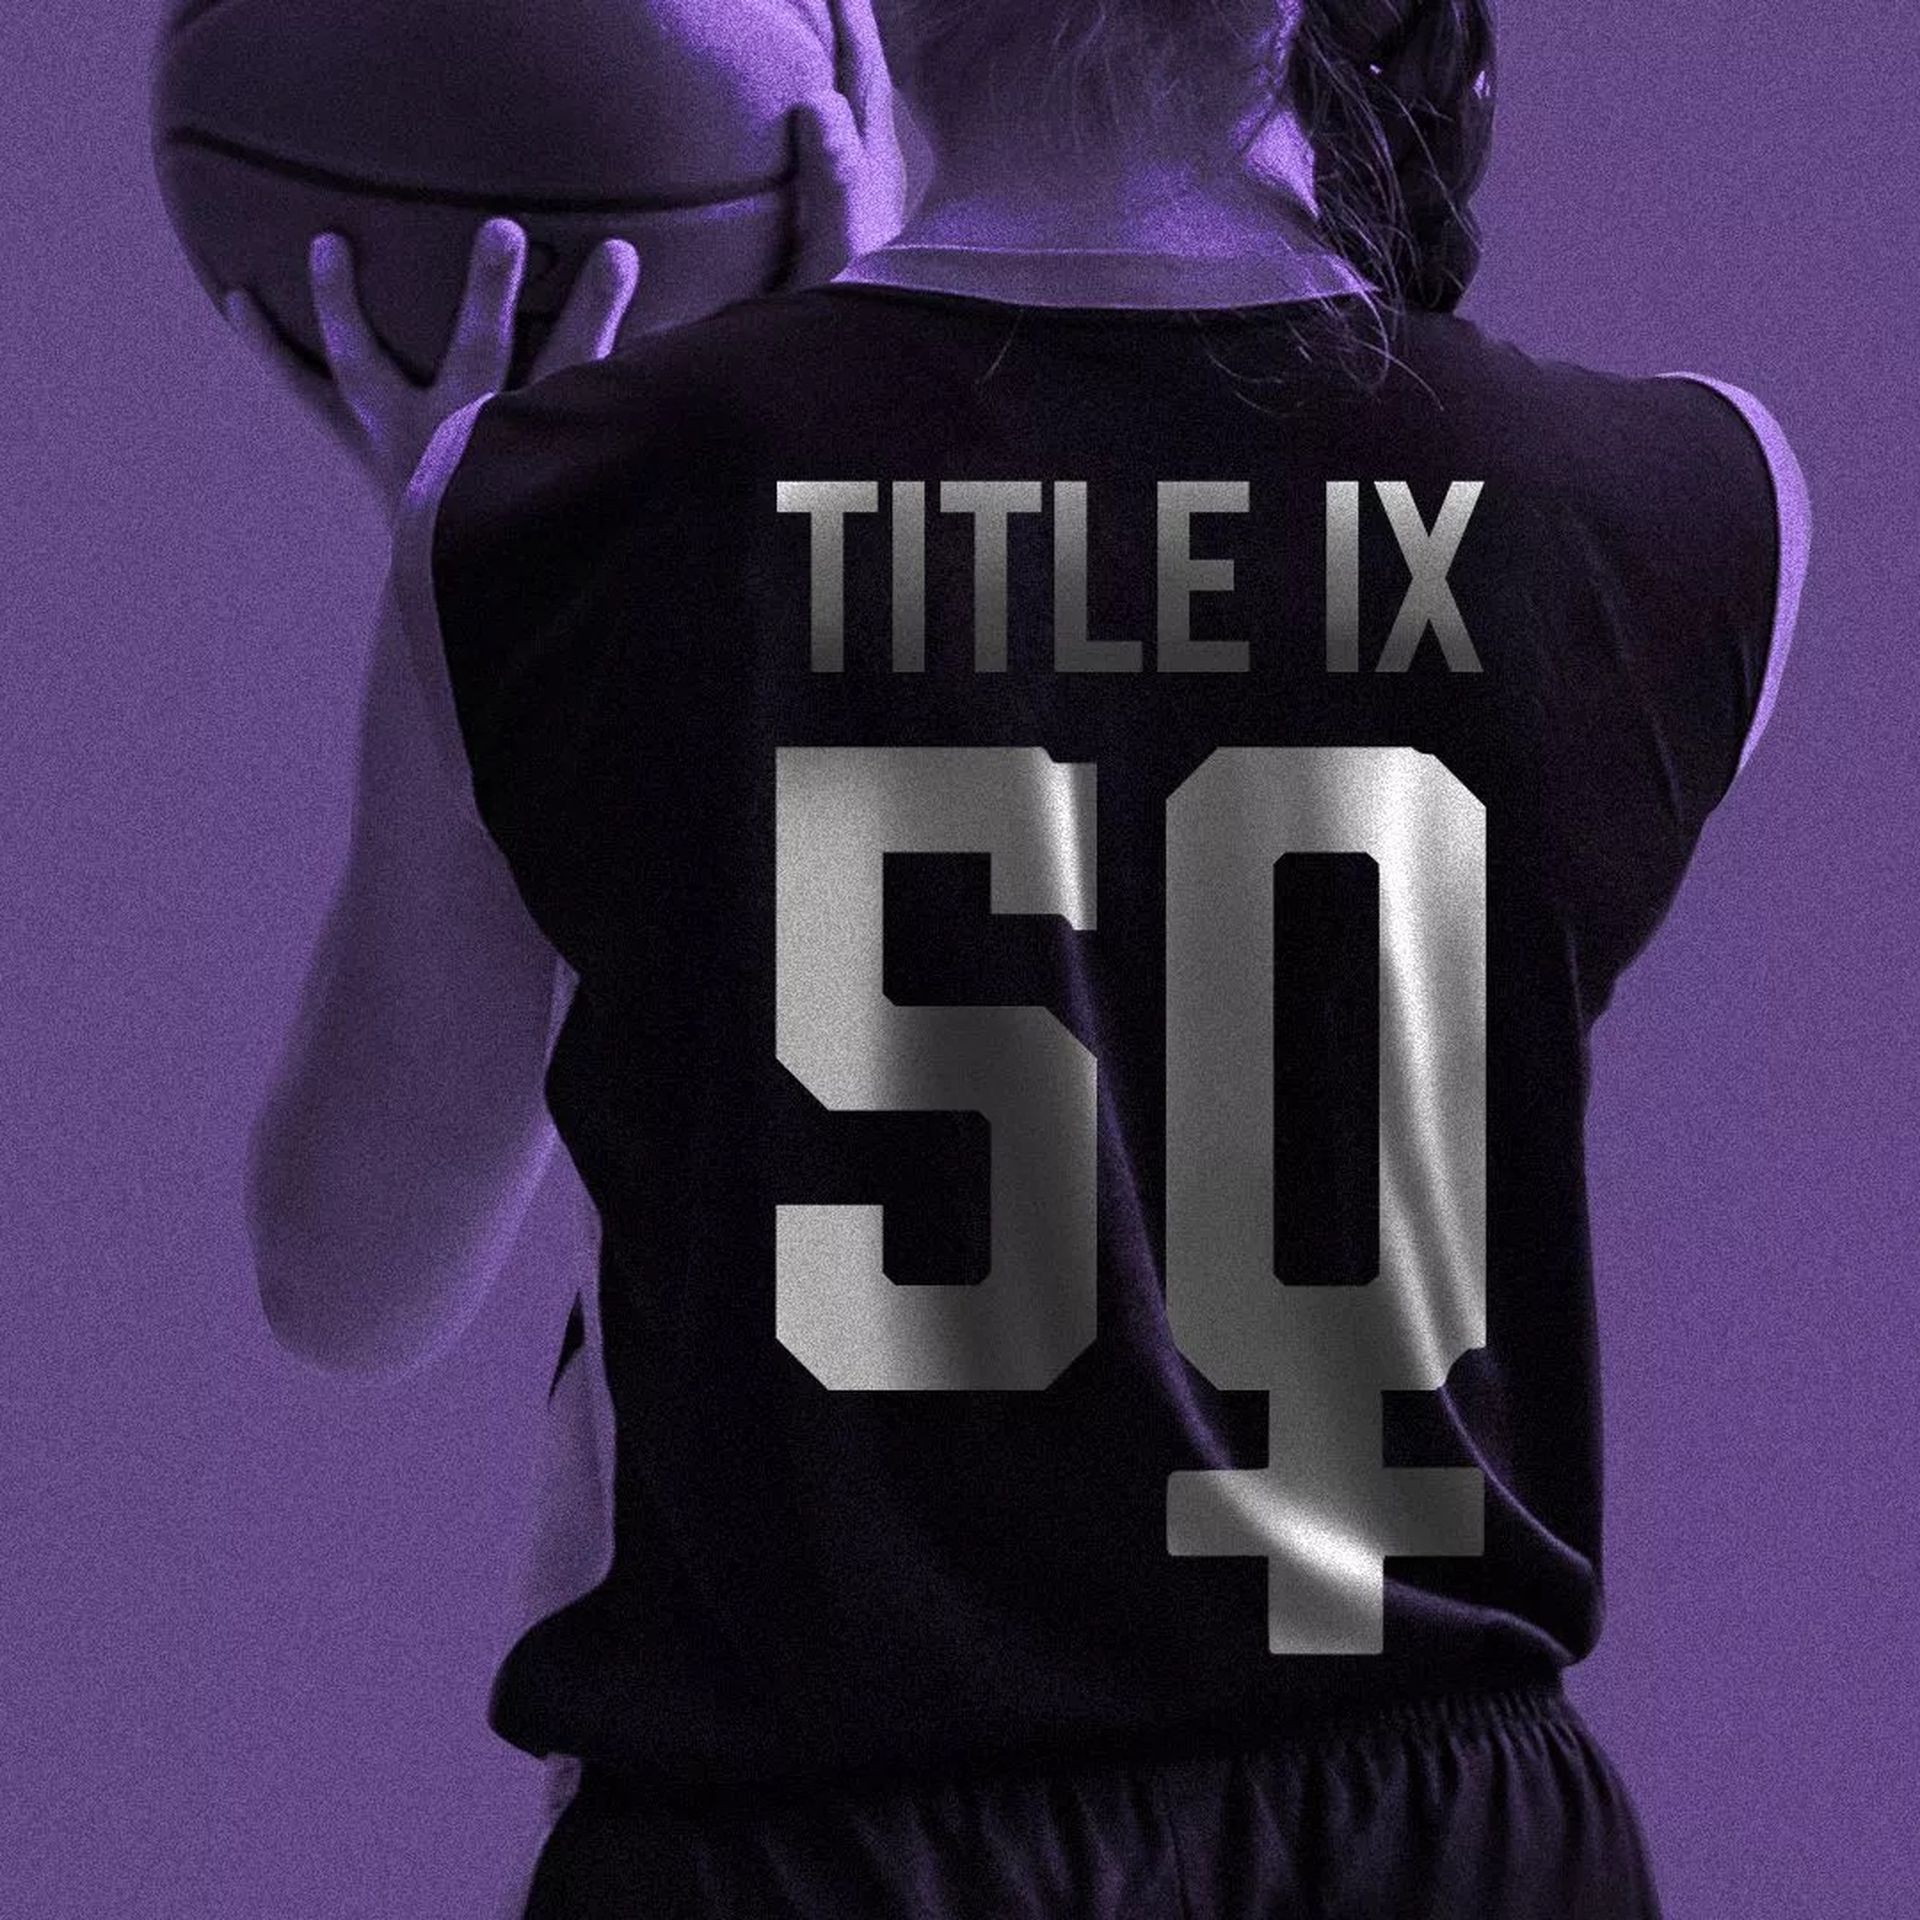 Title IX 50th anniversary: Women short-changed in major college sports